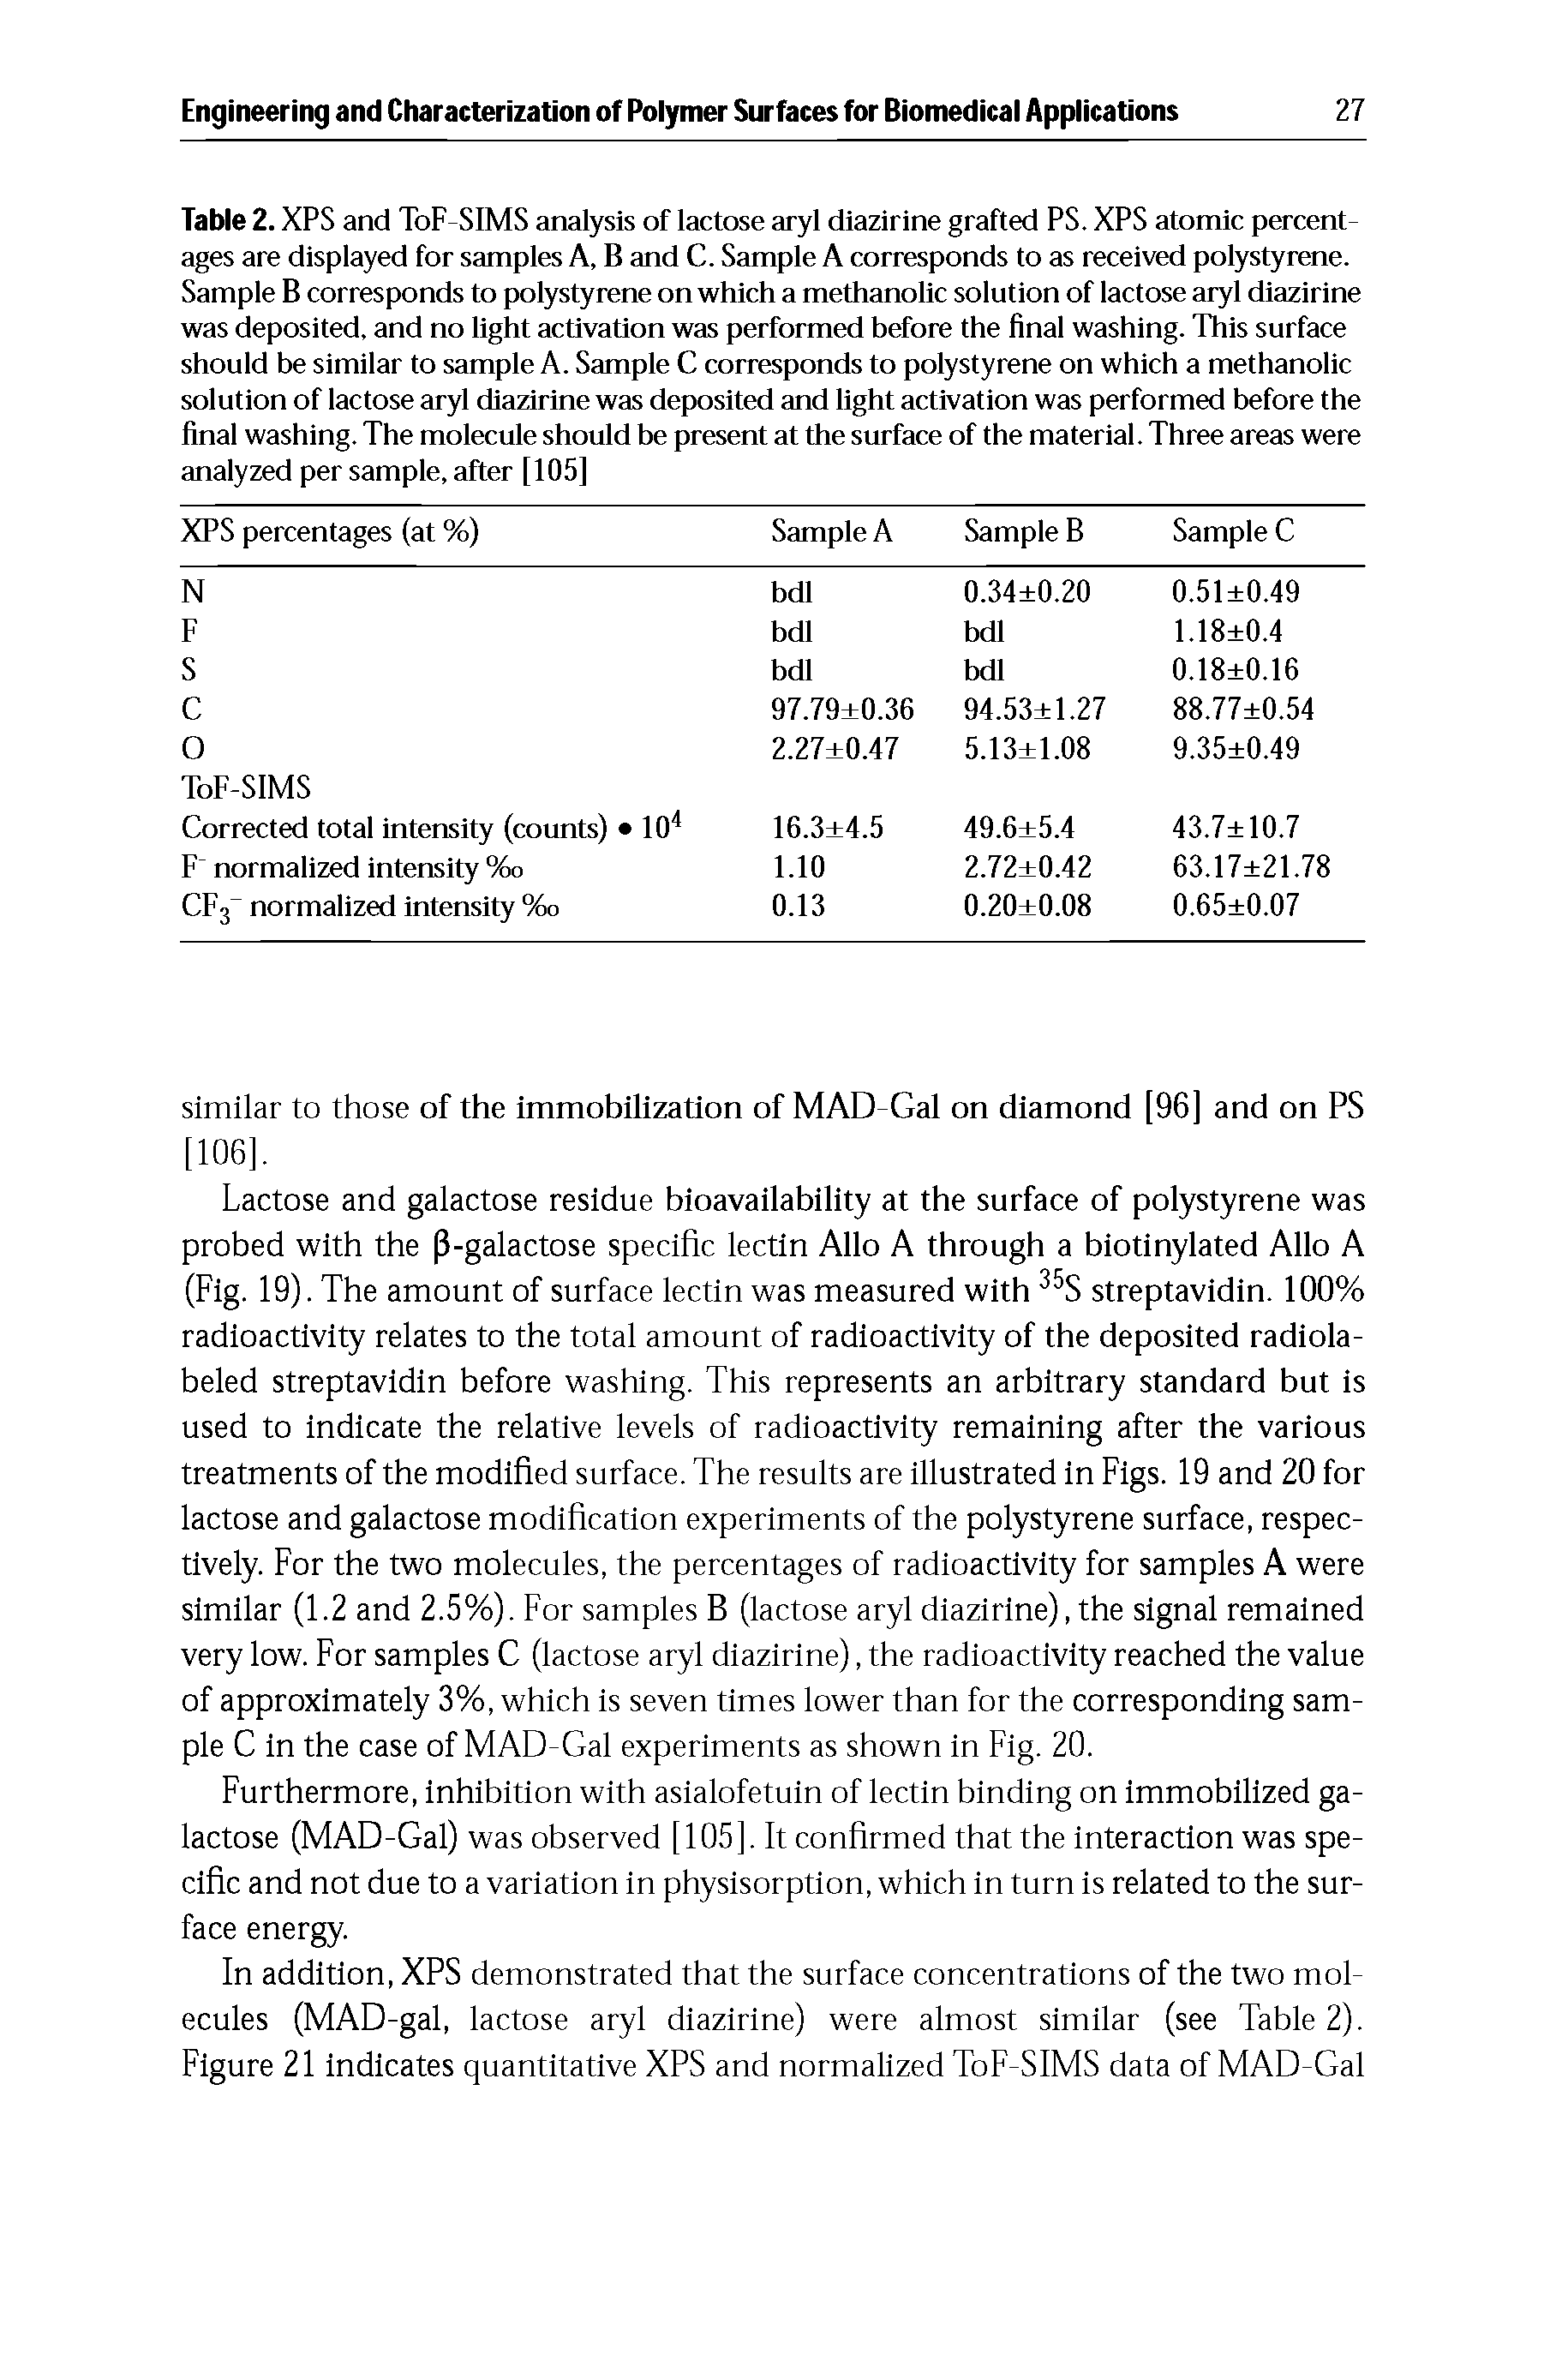 Table 2. XPS and ToF-SIMS analysis of lactose aryl diazirine grafted PS. XPS atomic percentages are displayed for samples A, B and C. Sample A corresponds to as received polystyrene. Sample B corresponds to polystyrene on which a methanoUc solution of lactose aryl diazirine was deposited, and no light activation was performed before the final washing. This surface should be similar to sample A. Sample C corresponds to polystyrene on which a methanolic solution of lactose aryl diazirine was deposited and light activation was performed before the final washing. The molecule should be present at the surface of the material. Three areas were analyzed per sample, after [105]...